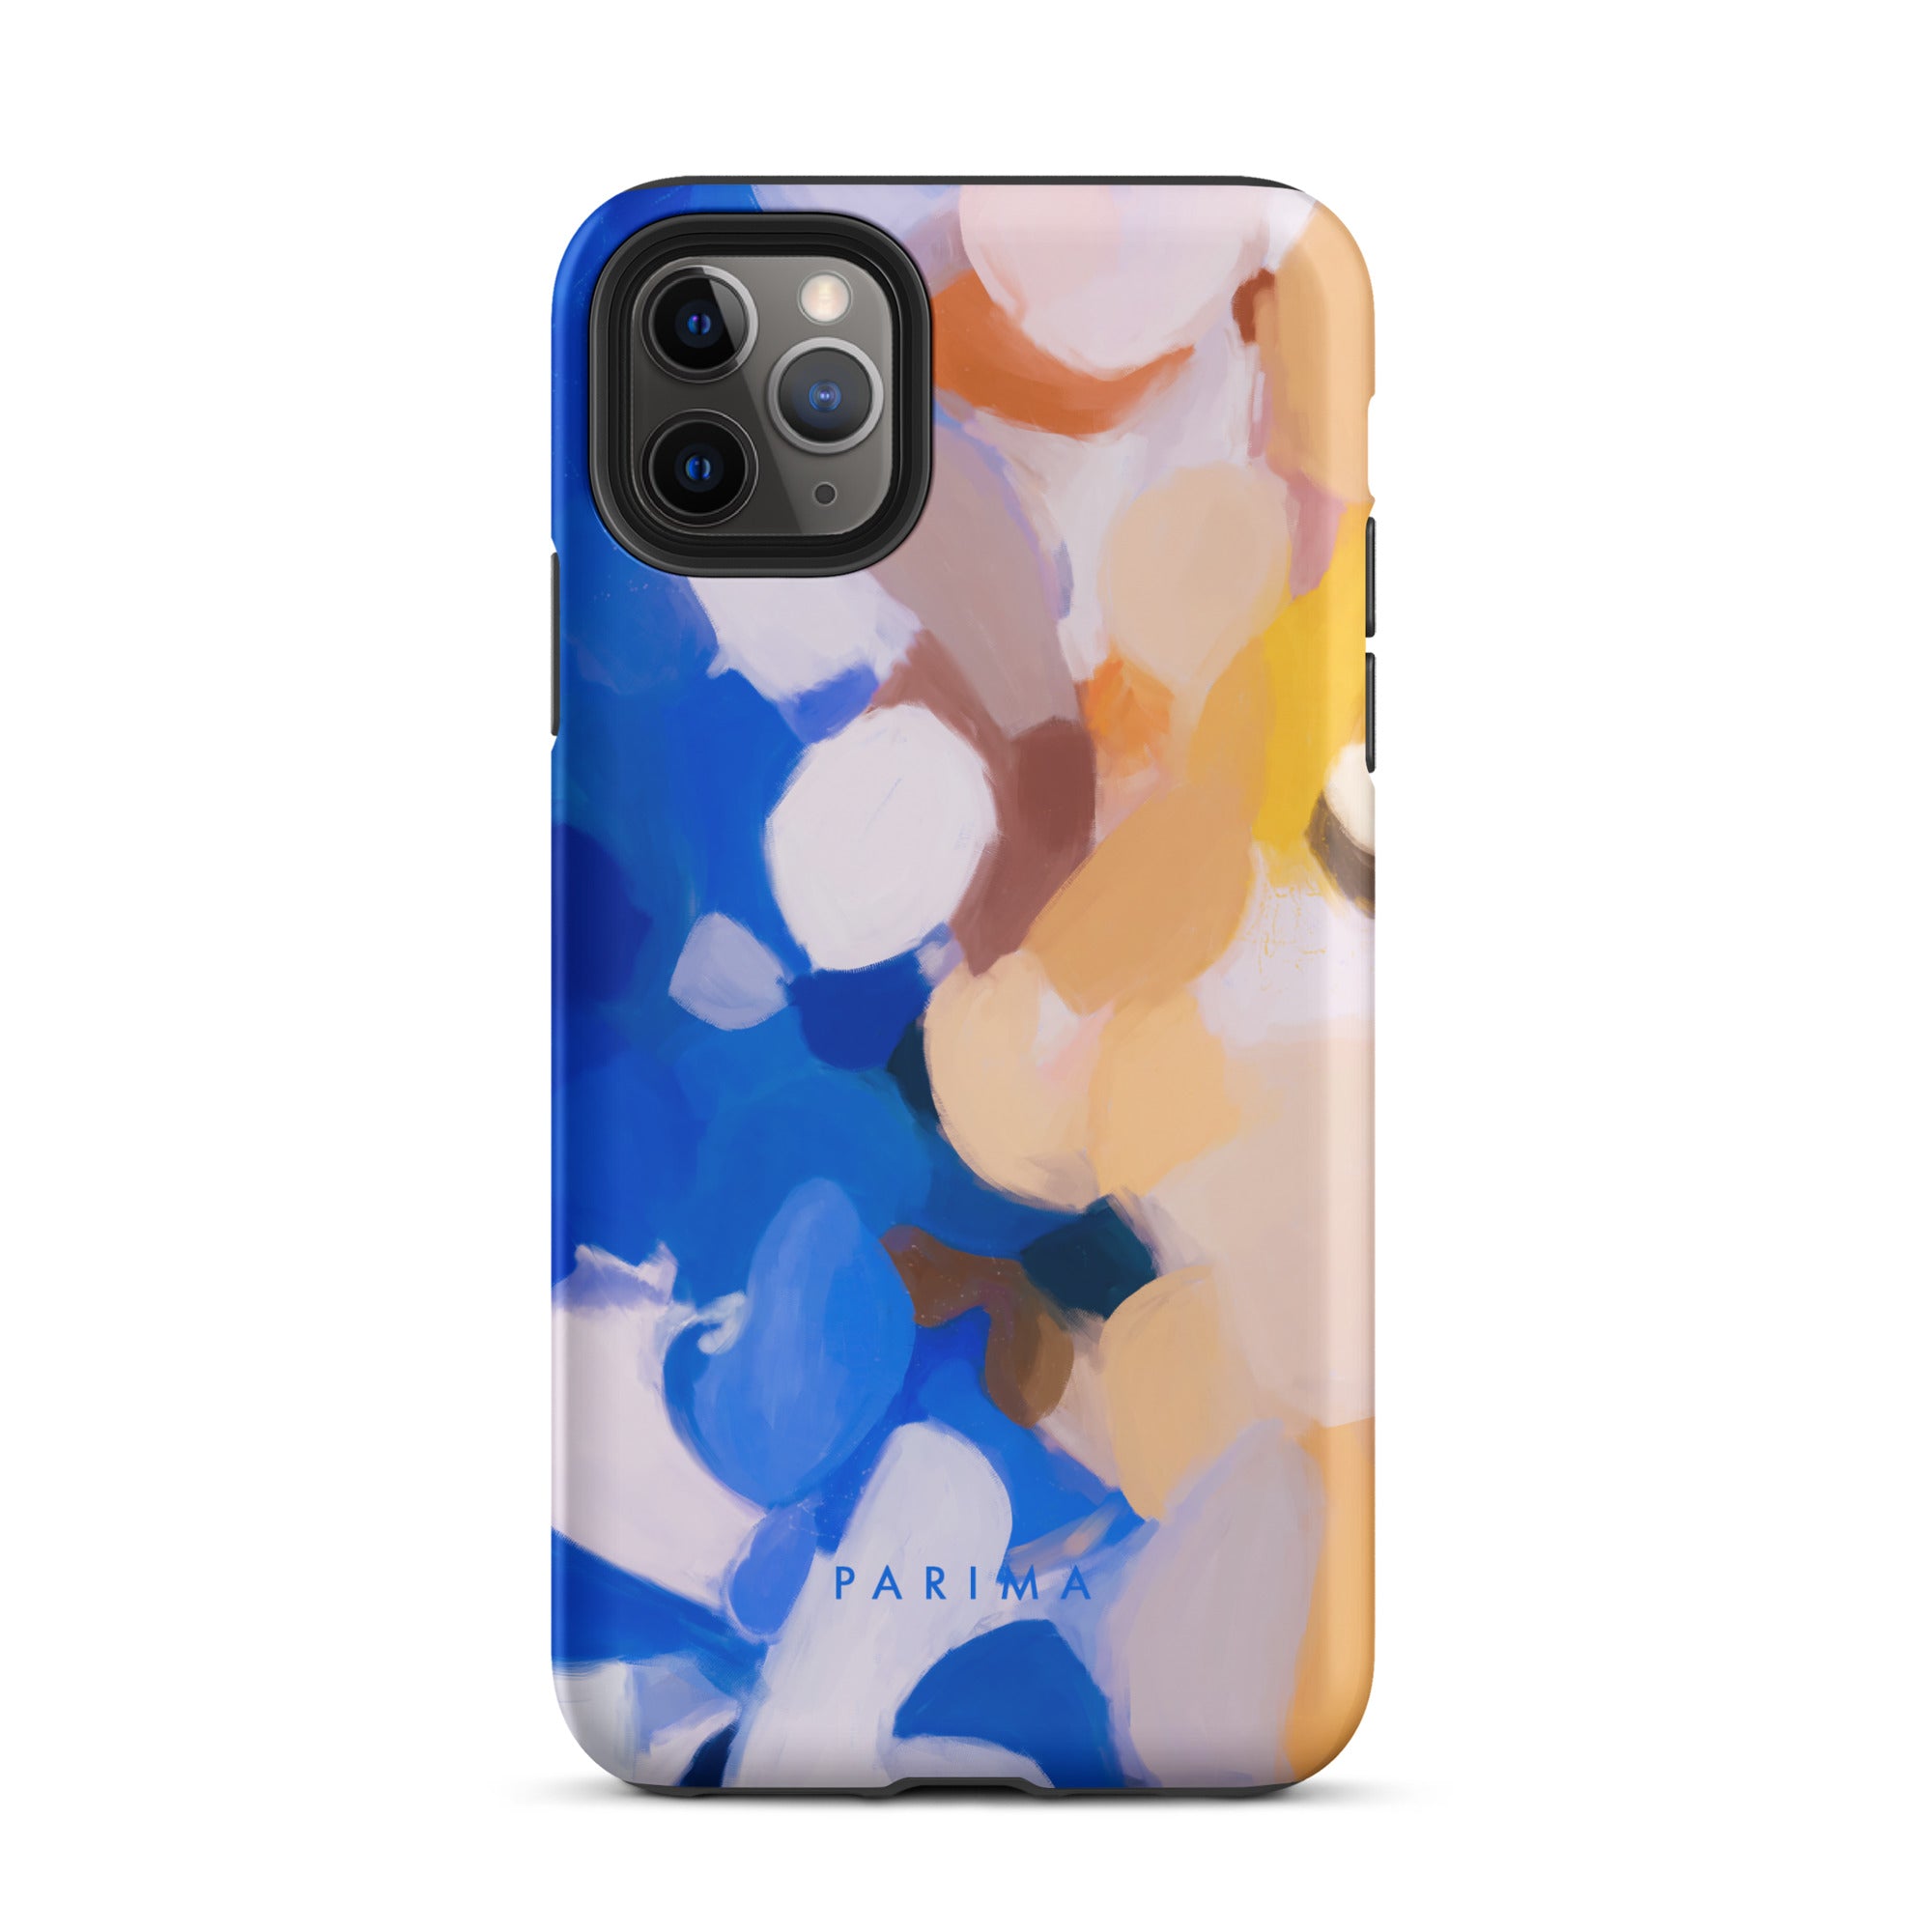 Bluebell, blue and yellow abstract art - iPhone 11 Pro Max tough case by Parima Studio